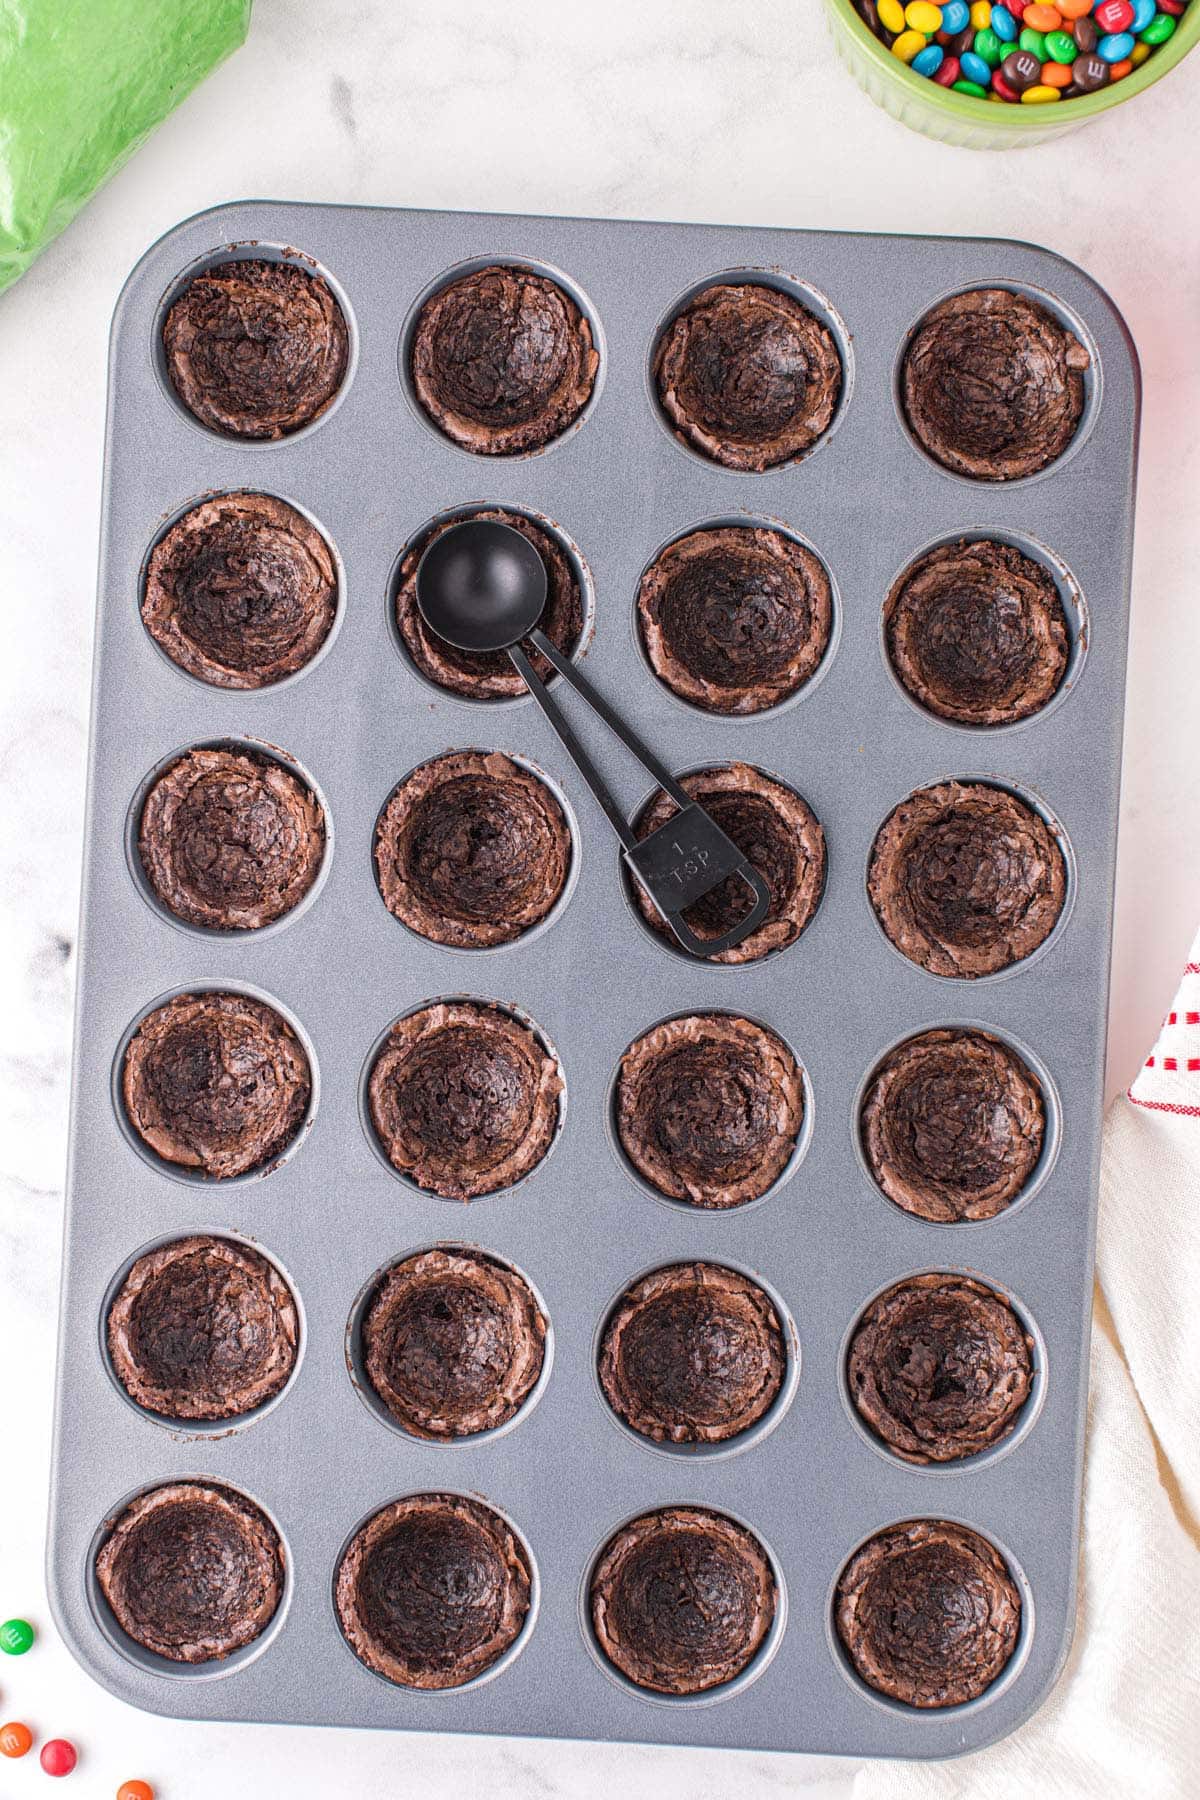 Use a teaspoon to create an indentation on the top of each baked brownie